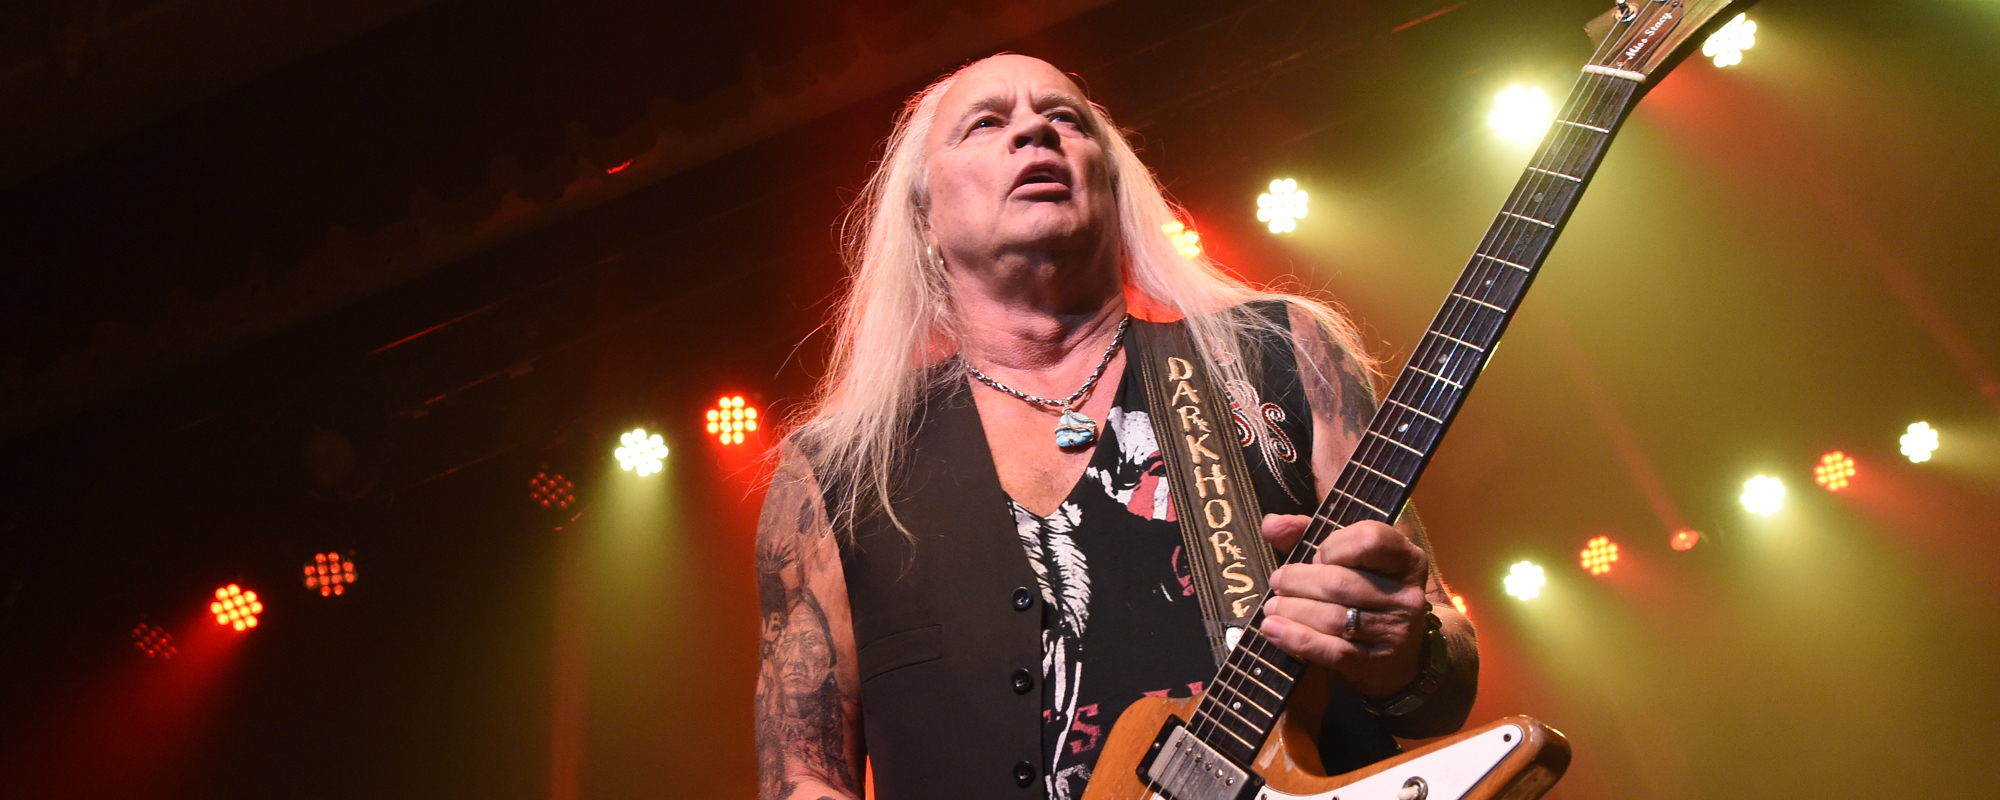 Lynyrd Skynyrd’s Rickey Medlocke Opens up About Continued Struggle of Coping With Gary Rossington’s Death